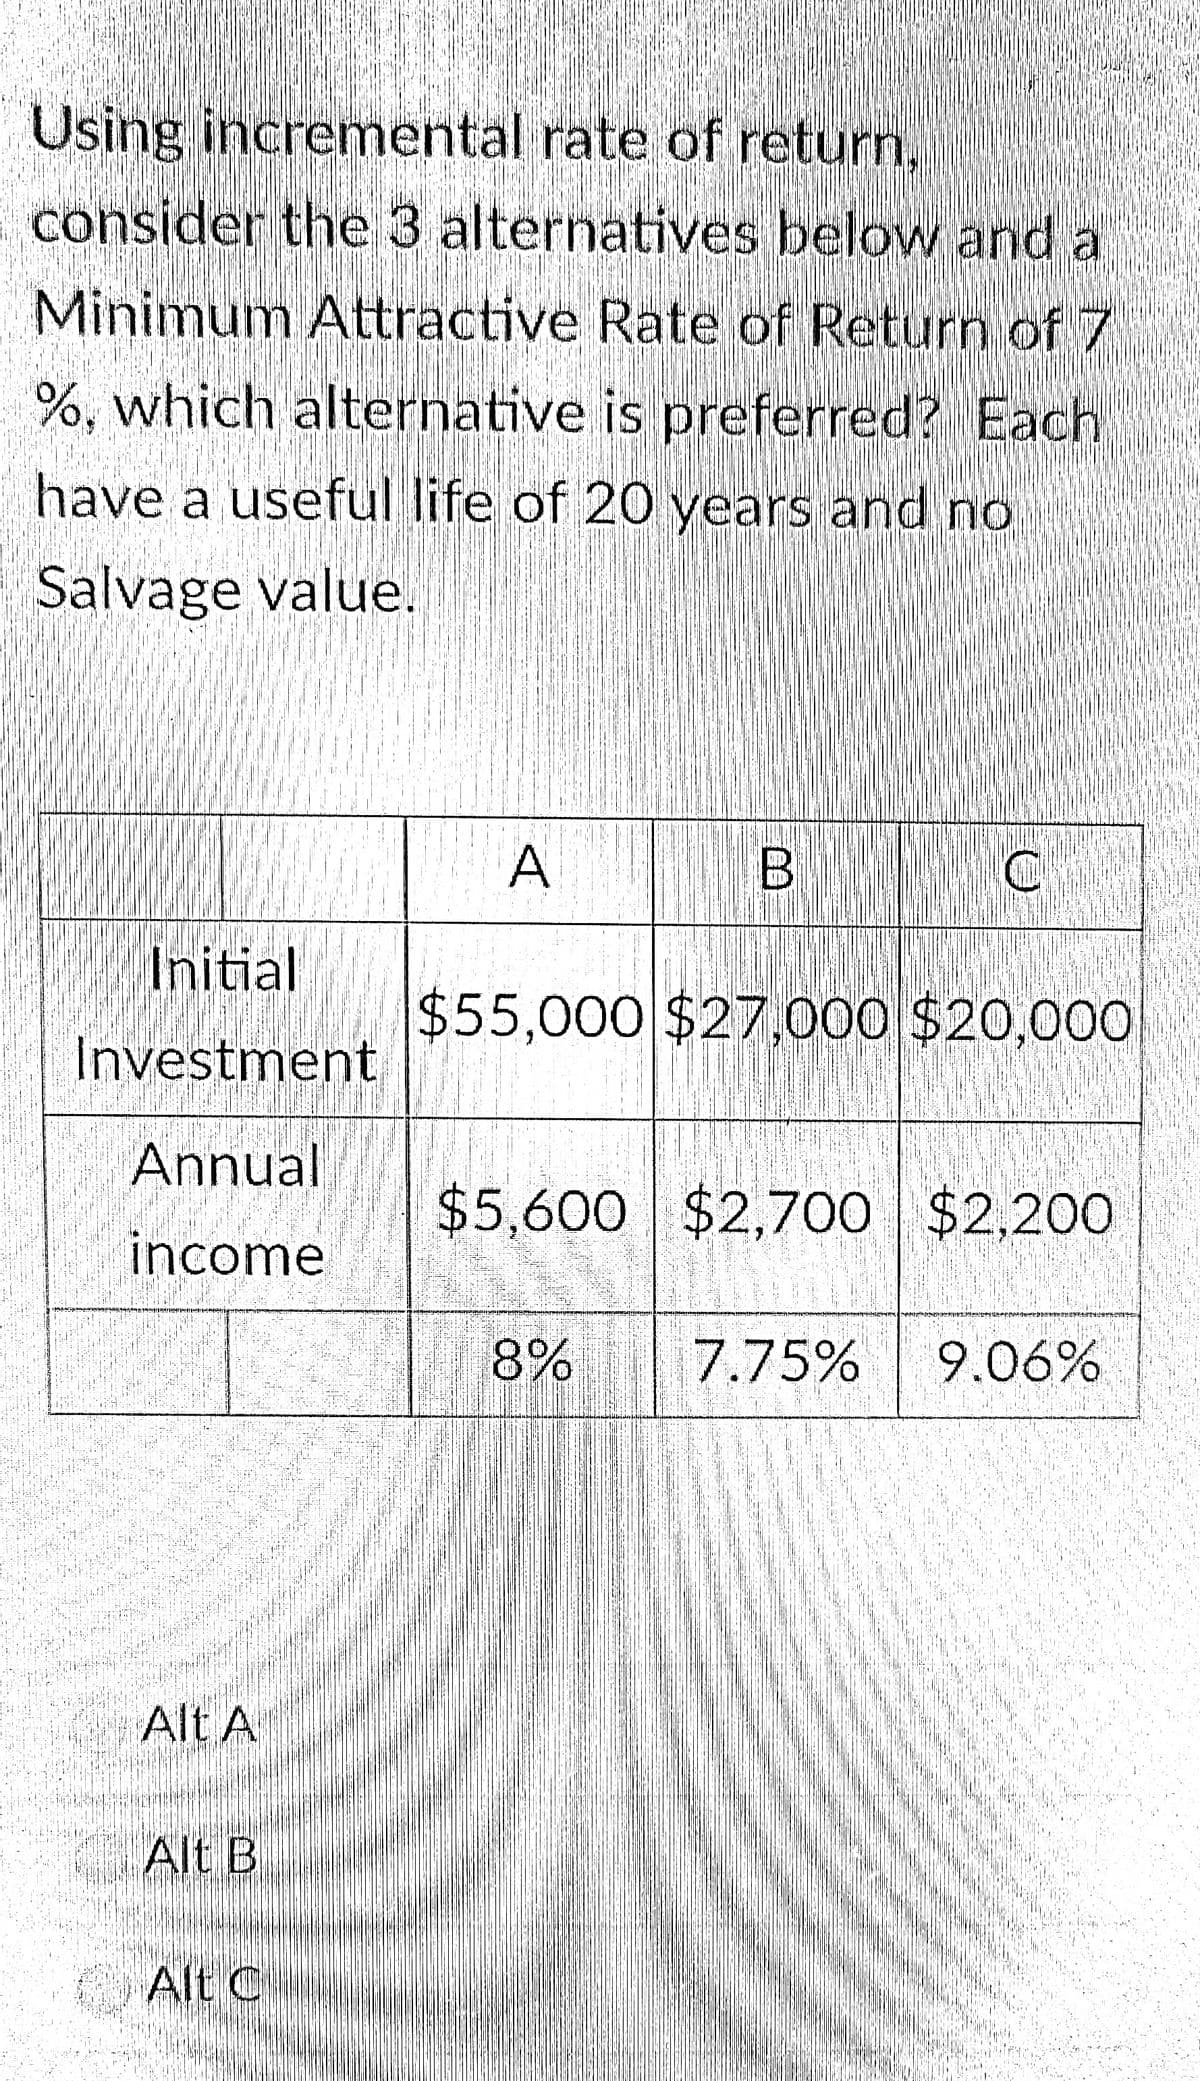 Using incremental rate of return,
consider the 3 alternatives below and a
Minimum Attractive Rate of Return of 7
%, which alternative is preferred? Each
have a useful life of 20 years and no
Salvage value.
A
Initial
$55,000 $27,000 $20,000
Investment
Annual
$5,600 $2,700 $2,200
income
8%
7.75%
9.06%
Alt A
Alt B
Alt C
